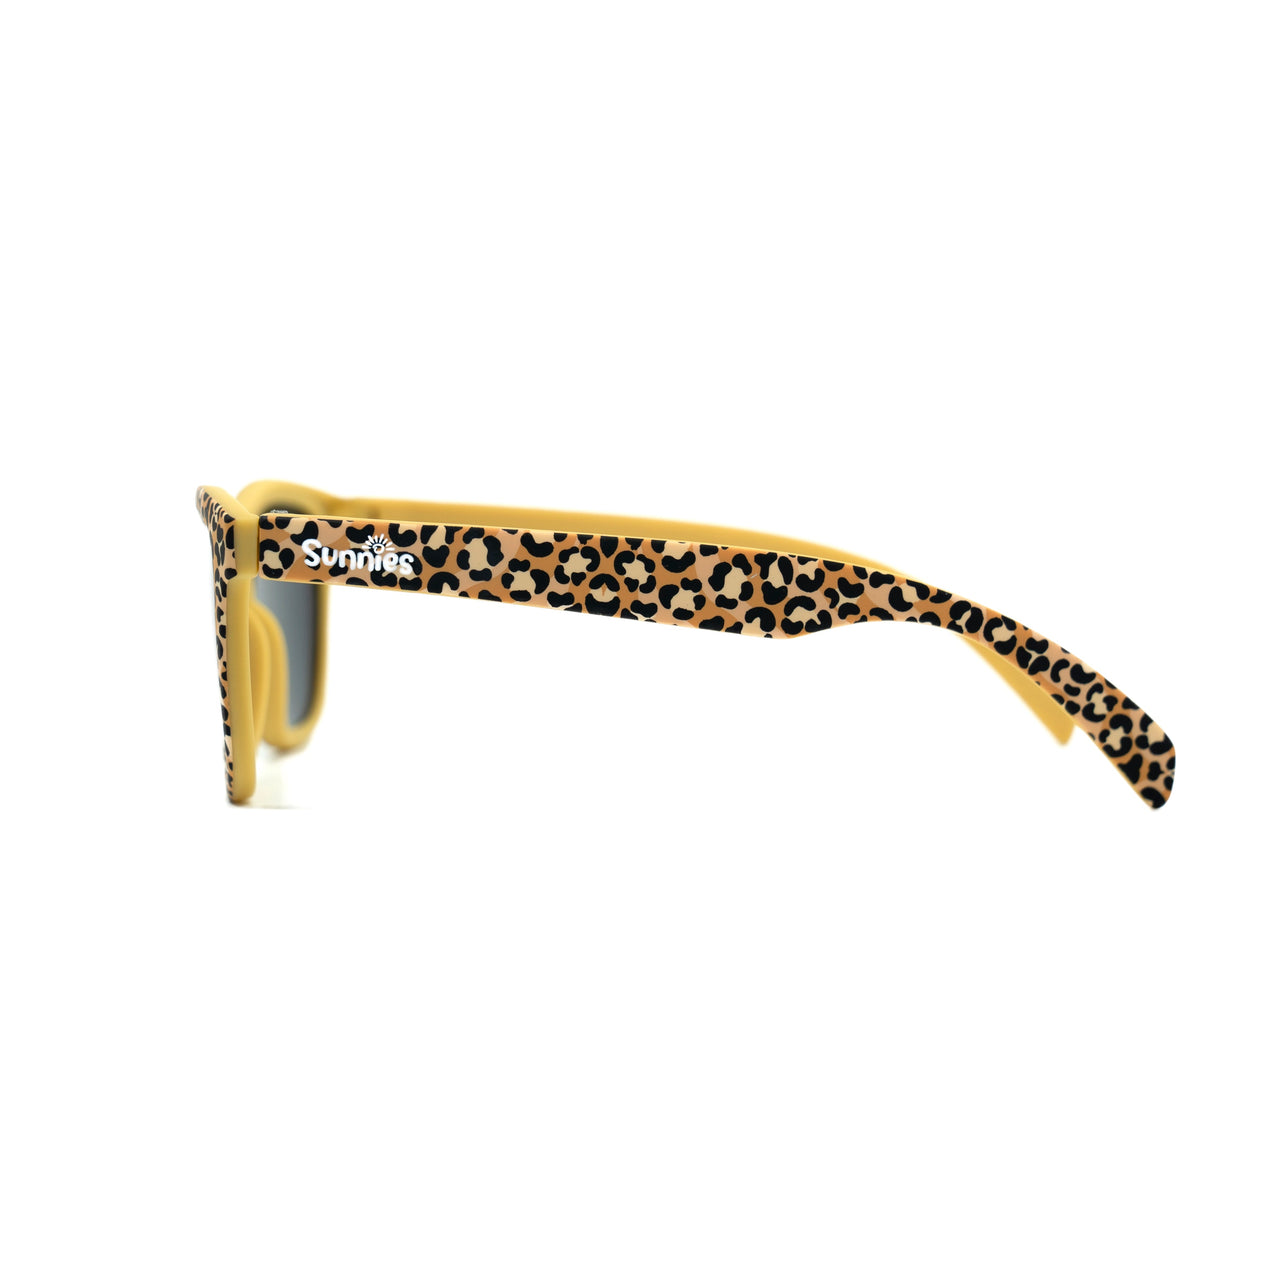 Side view of leopard kids sunglasses with anti-slip material and polarized lenses